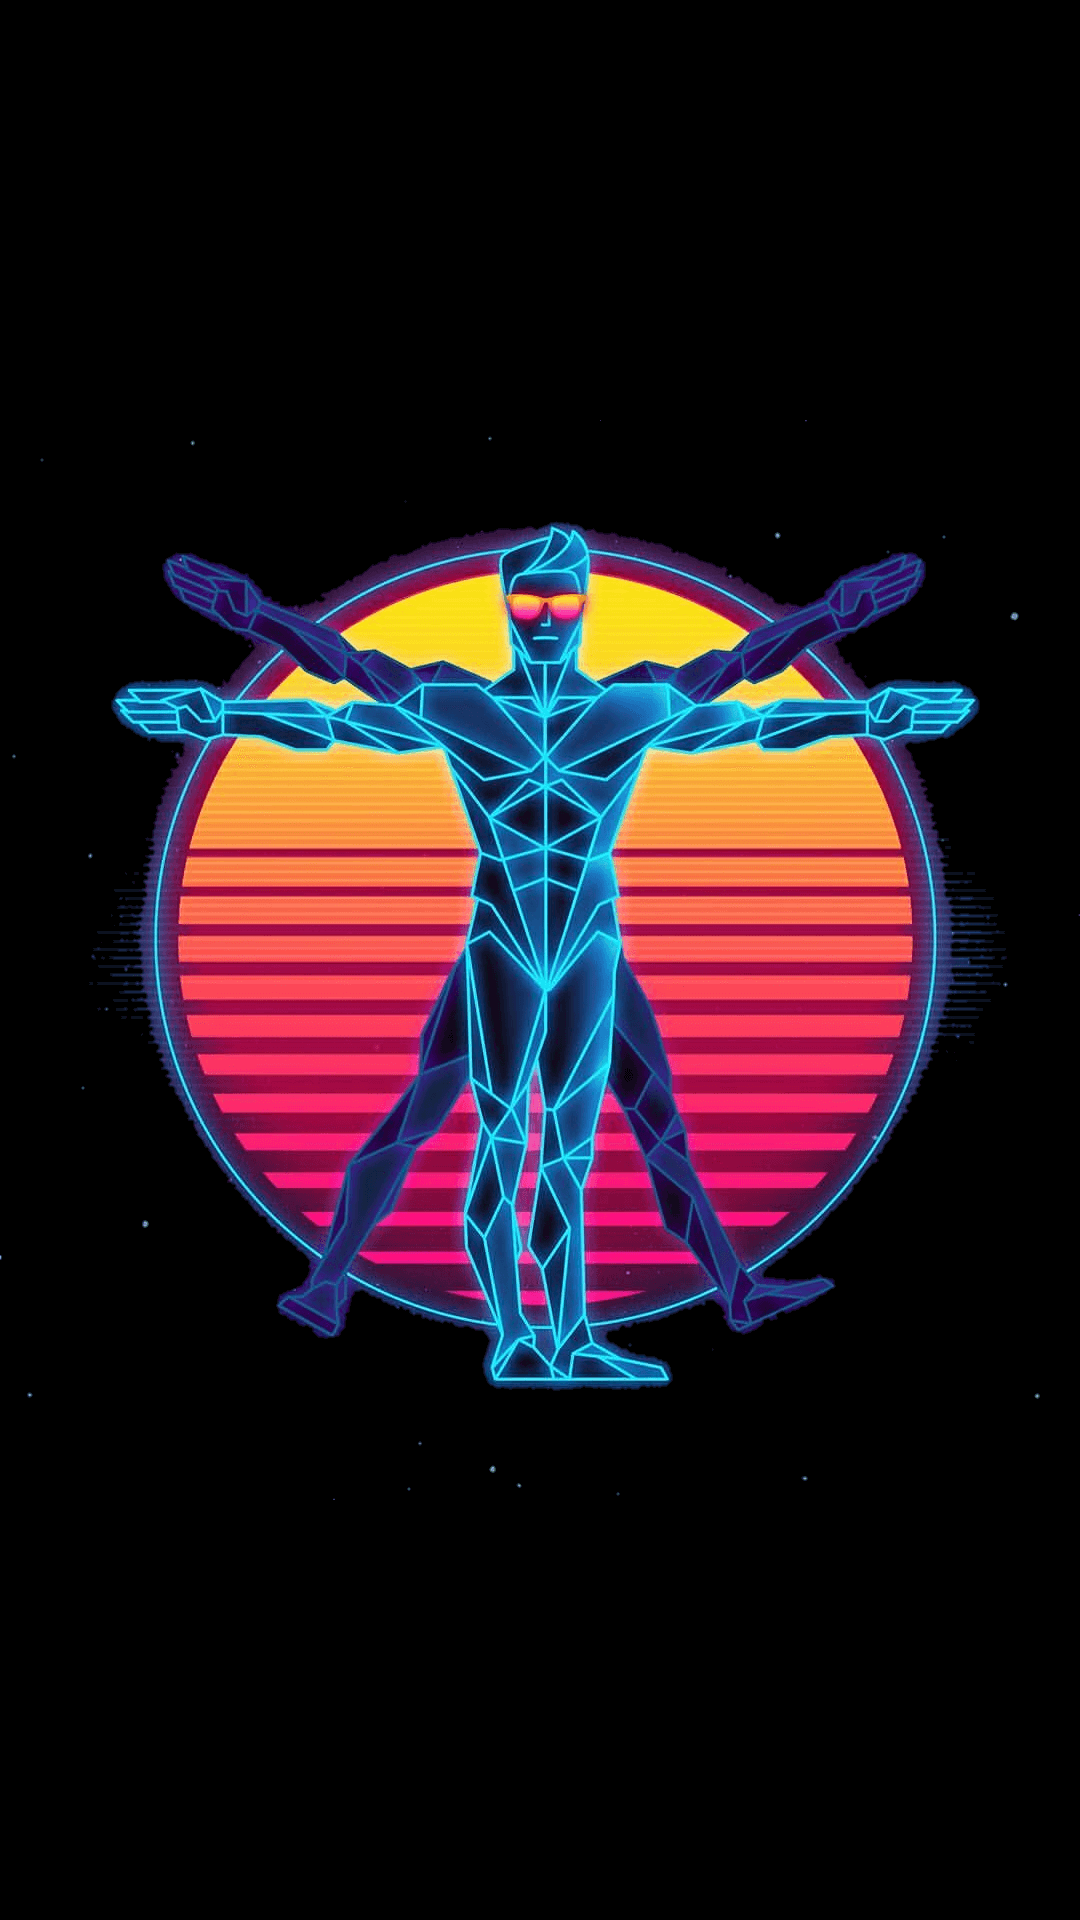 Found This Outrun-ish Feeling Wallpaper In An App Today, - Neon Vitruvian , HD Wallpaper & Backgrounds